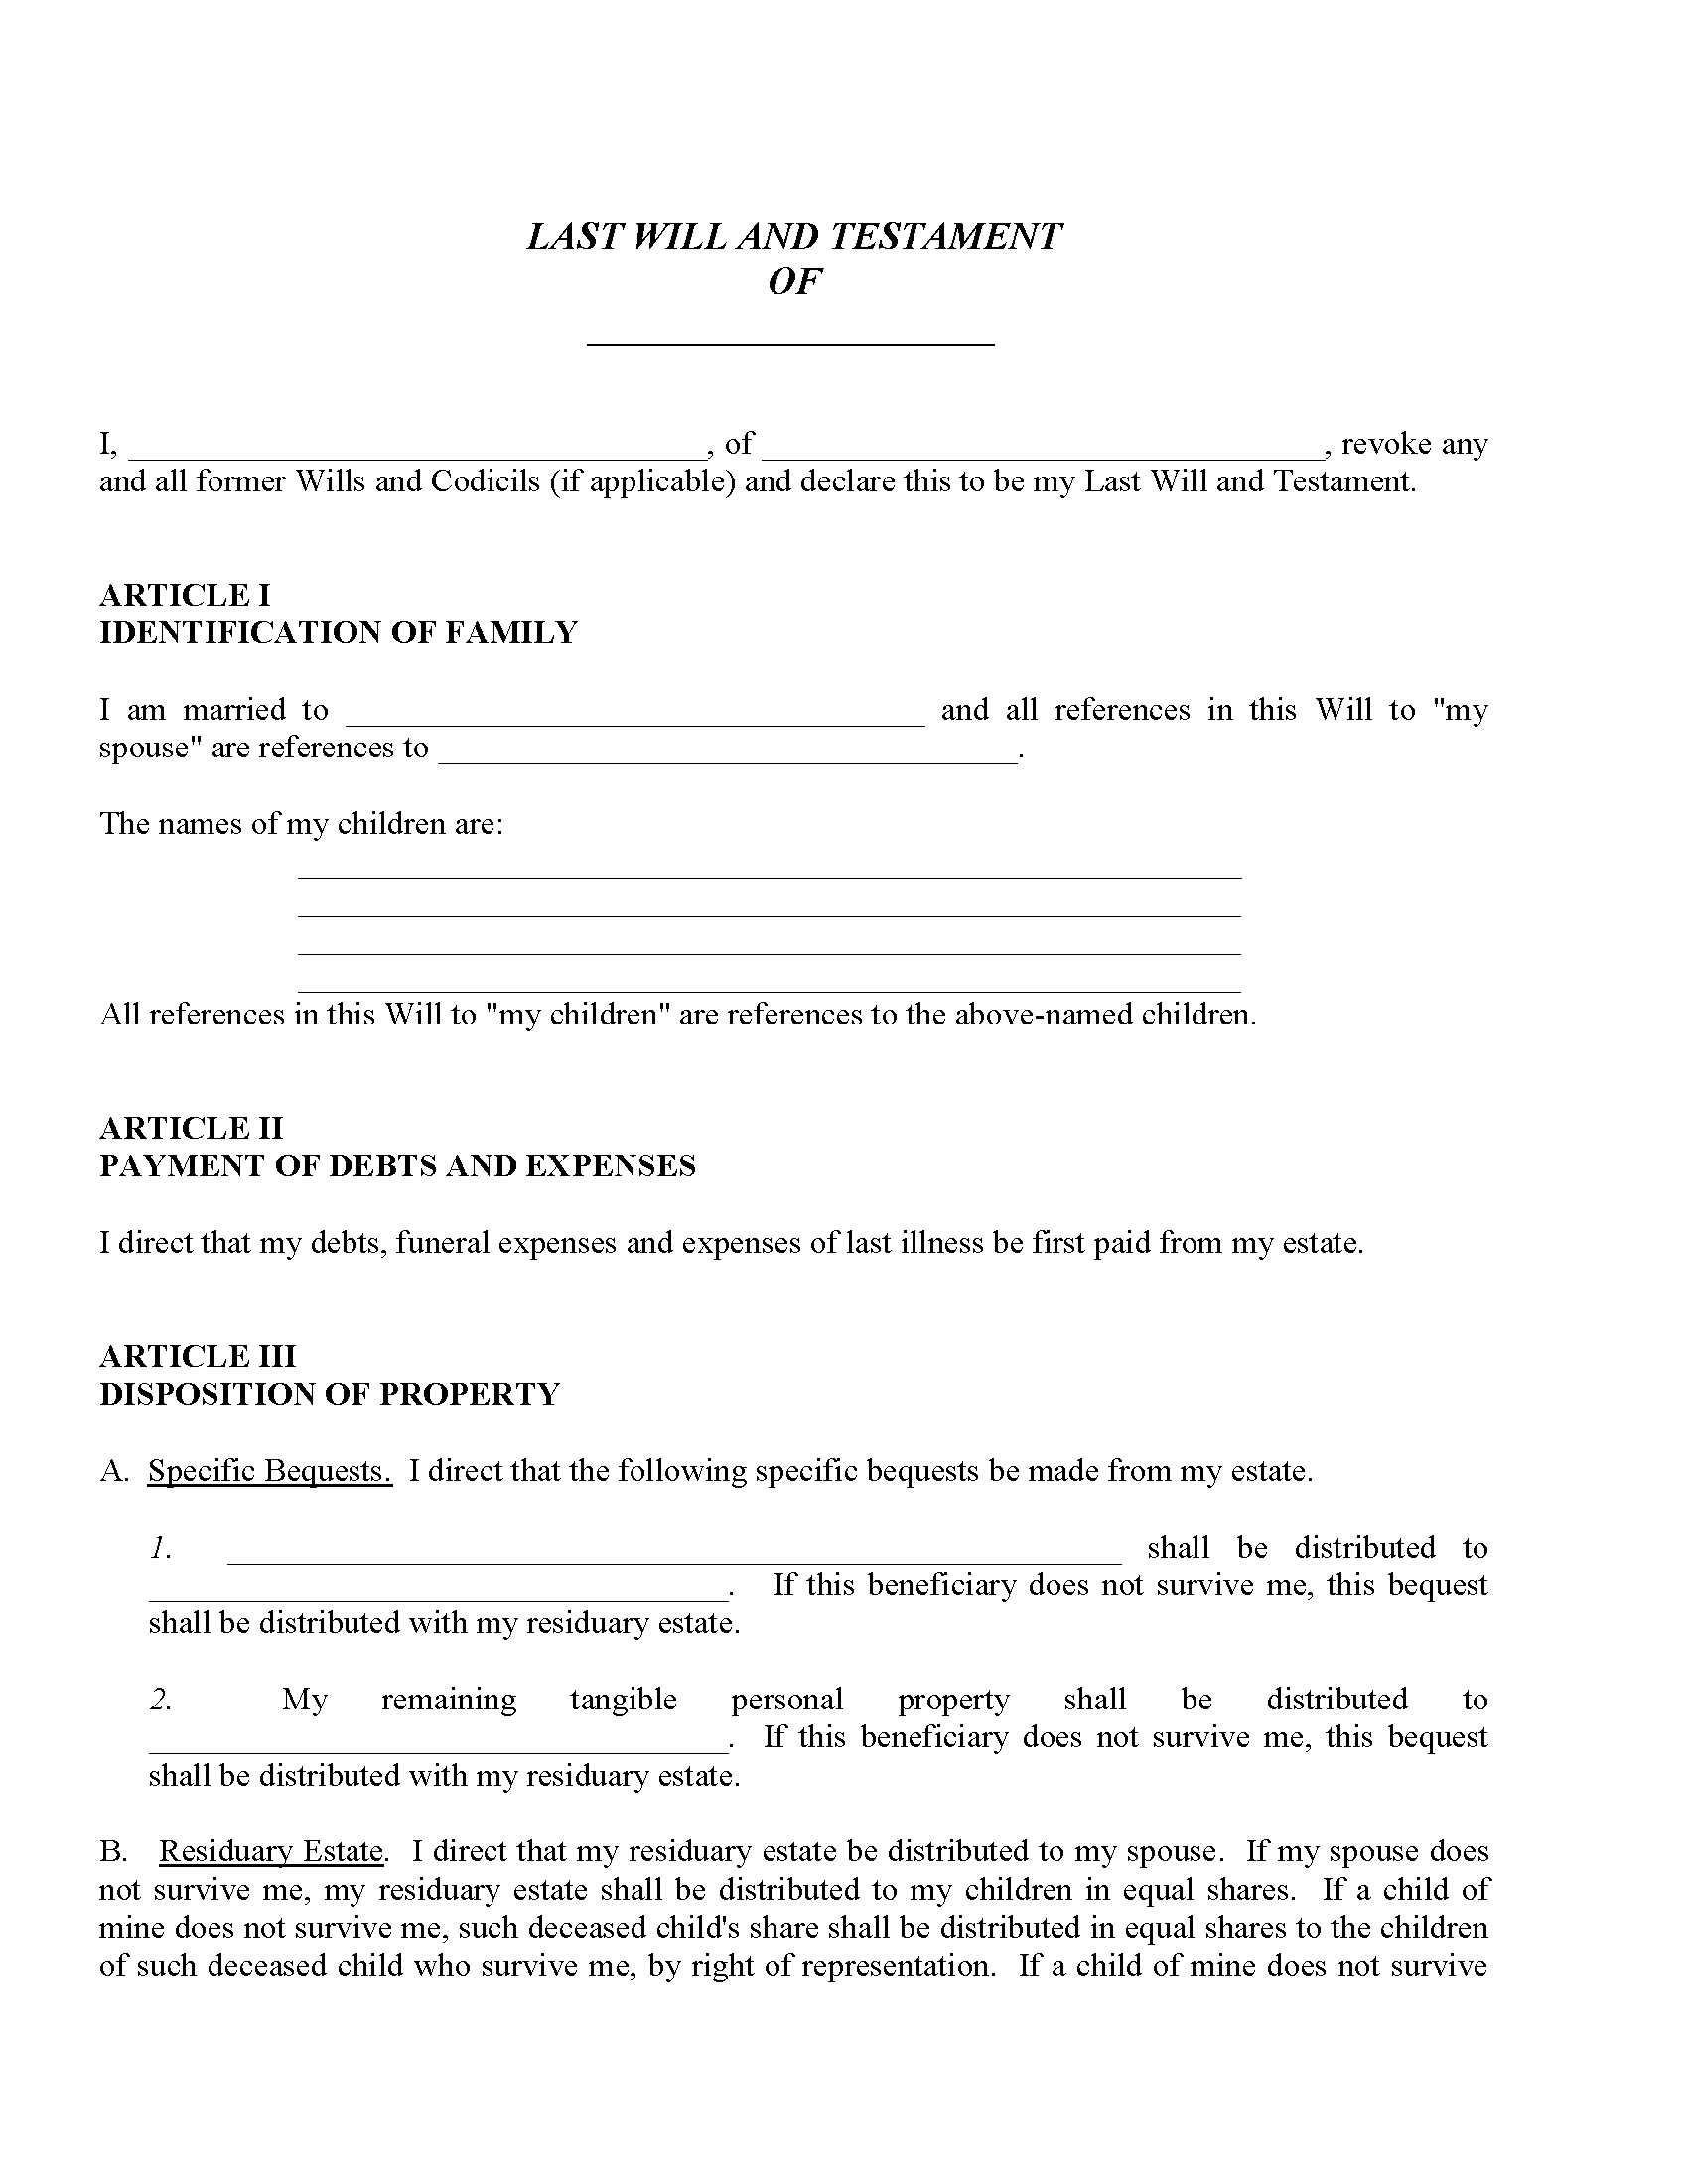 Arizona Last Will and Testament Free Printable Legal Forms